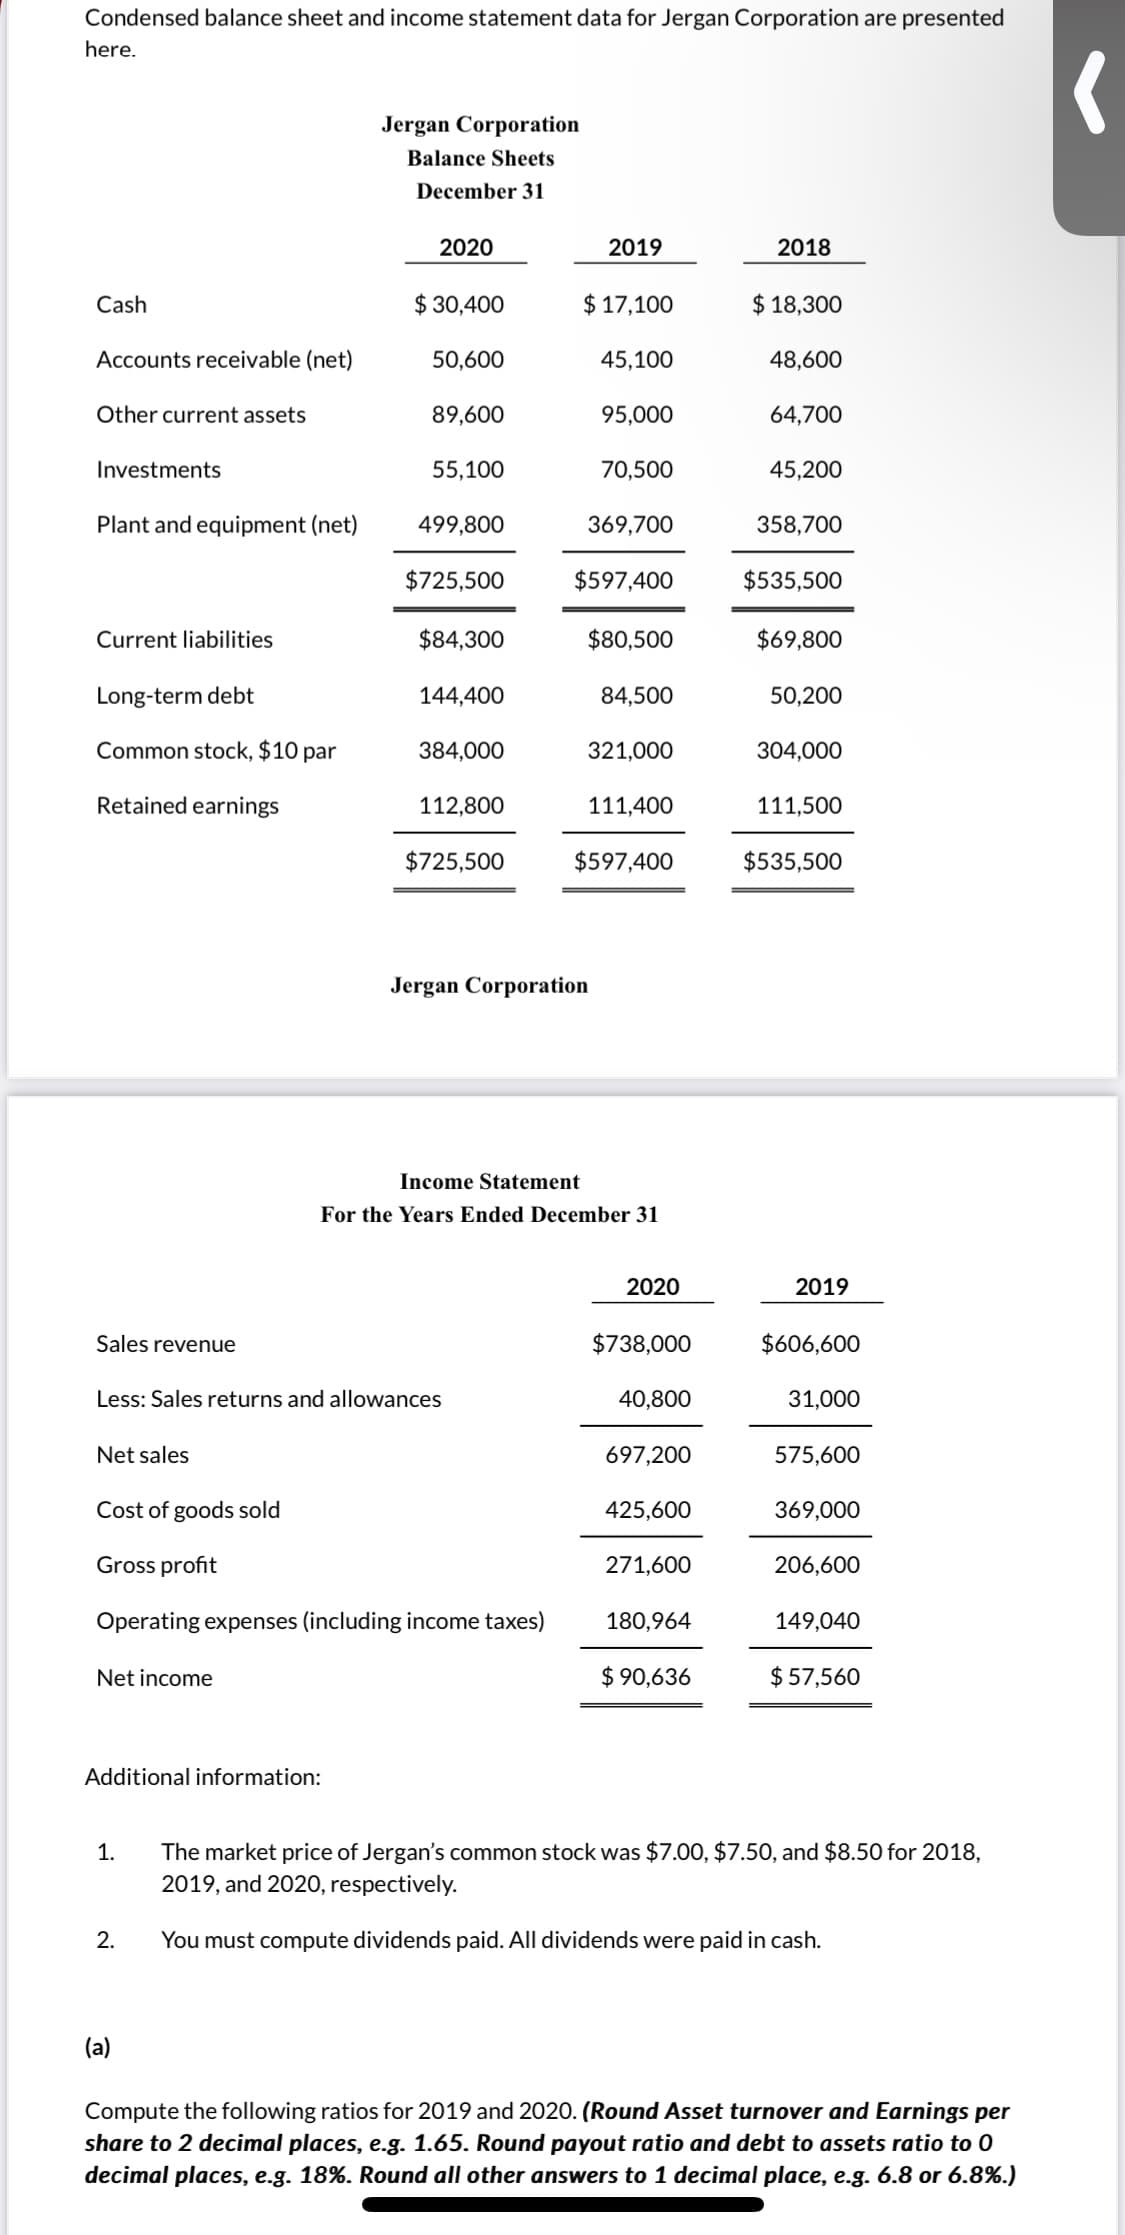 Condensed balance sheet and income statement data for Jergan Corporation are presented
here.
Jergan Corporation
Balance Sheets
December 31
2020
2019
2018
Cash
$ 30,400
$ 17,100
$ 18,300
Accounts receivable (net)
50,600
45,100
48,600
Other current assets
89,600
95,000
64,700
Investments
55,100
70,500
45,200
Plant and equipment (net)
499,800
369,700
358,700
$725,500
$597,400
$535,500
Current liabilities
$84,300
$80,500
$69,800
Long-term debt
144,400
84,500
50,200
Common stock, $10 par
384,000
321,000
304,000
Retained earnings
112,800
111,400
111,500
$725,500
$597,400
$535,500
Jergan Corporation
Income Statement
For the Years Ended December 31
2019
Sales revenue
$738,000
$606,600
Less: Sales returns and allowances
40,800
31,000
Net sales
697,200
575,600
Cost of goods sold
425,600
369,000
Gross profit
271,600
206,600
Operating expenses (including income taxes)
180,964
149,040
Net income
$ 90,636
$ 57,560
Additional information:
The market price of Jergan's common stock was $7.00, $7.50, and $8.50 for 2018,
2019, and 202O, respectively.
1.
2.
You must compute dividends paid. All dividends were paid in cash.
(a)
19 and 2020. (Round Asset turnover and Earnings per
Compute the following ratios
share to 2 decimal places, e.g. 1.65. Round payout ratio and debt to assets ratio to 0
decimal places, e.g. 18%. Round all other answers to 1 decimal place, e.g. 6.8 or 6.8%.)
